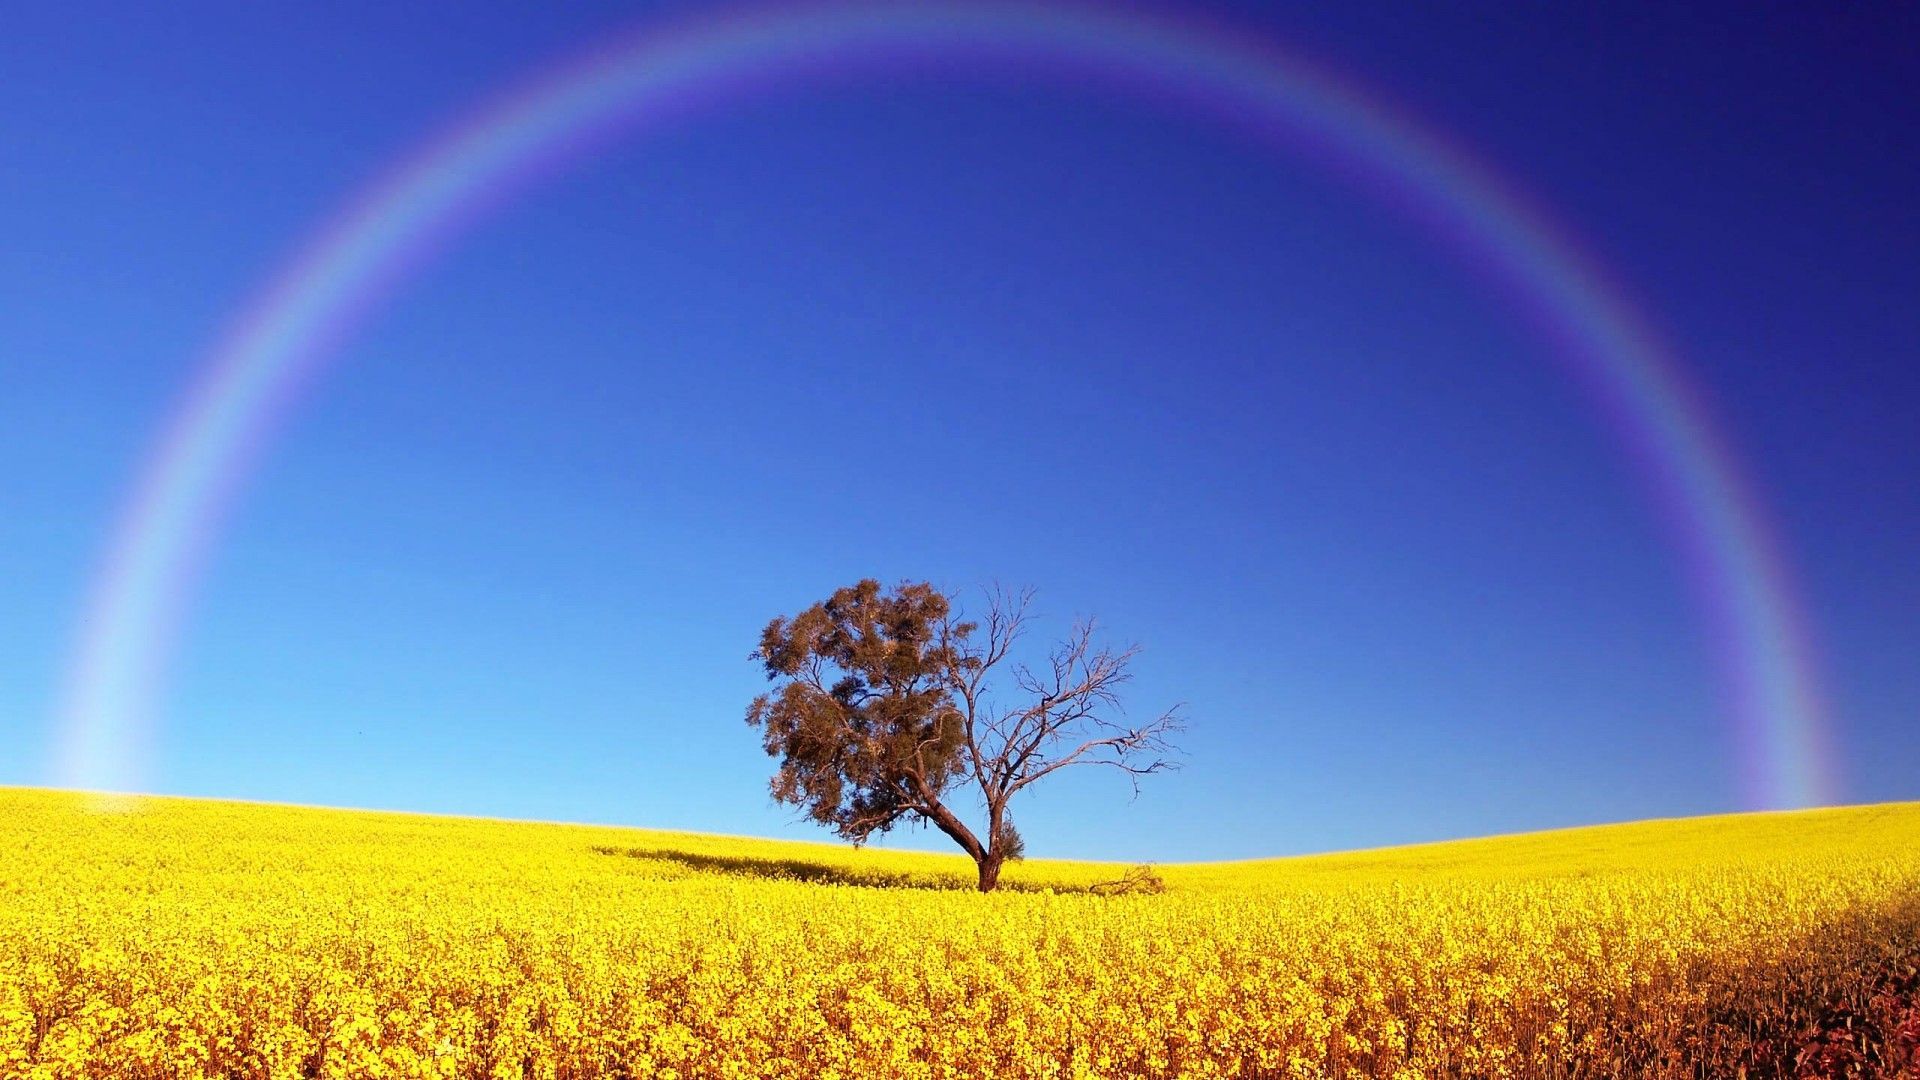 Rainbow | HD Wallpapers | Pictures | Images | Backgrounds | Photos